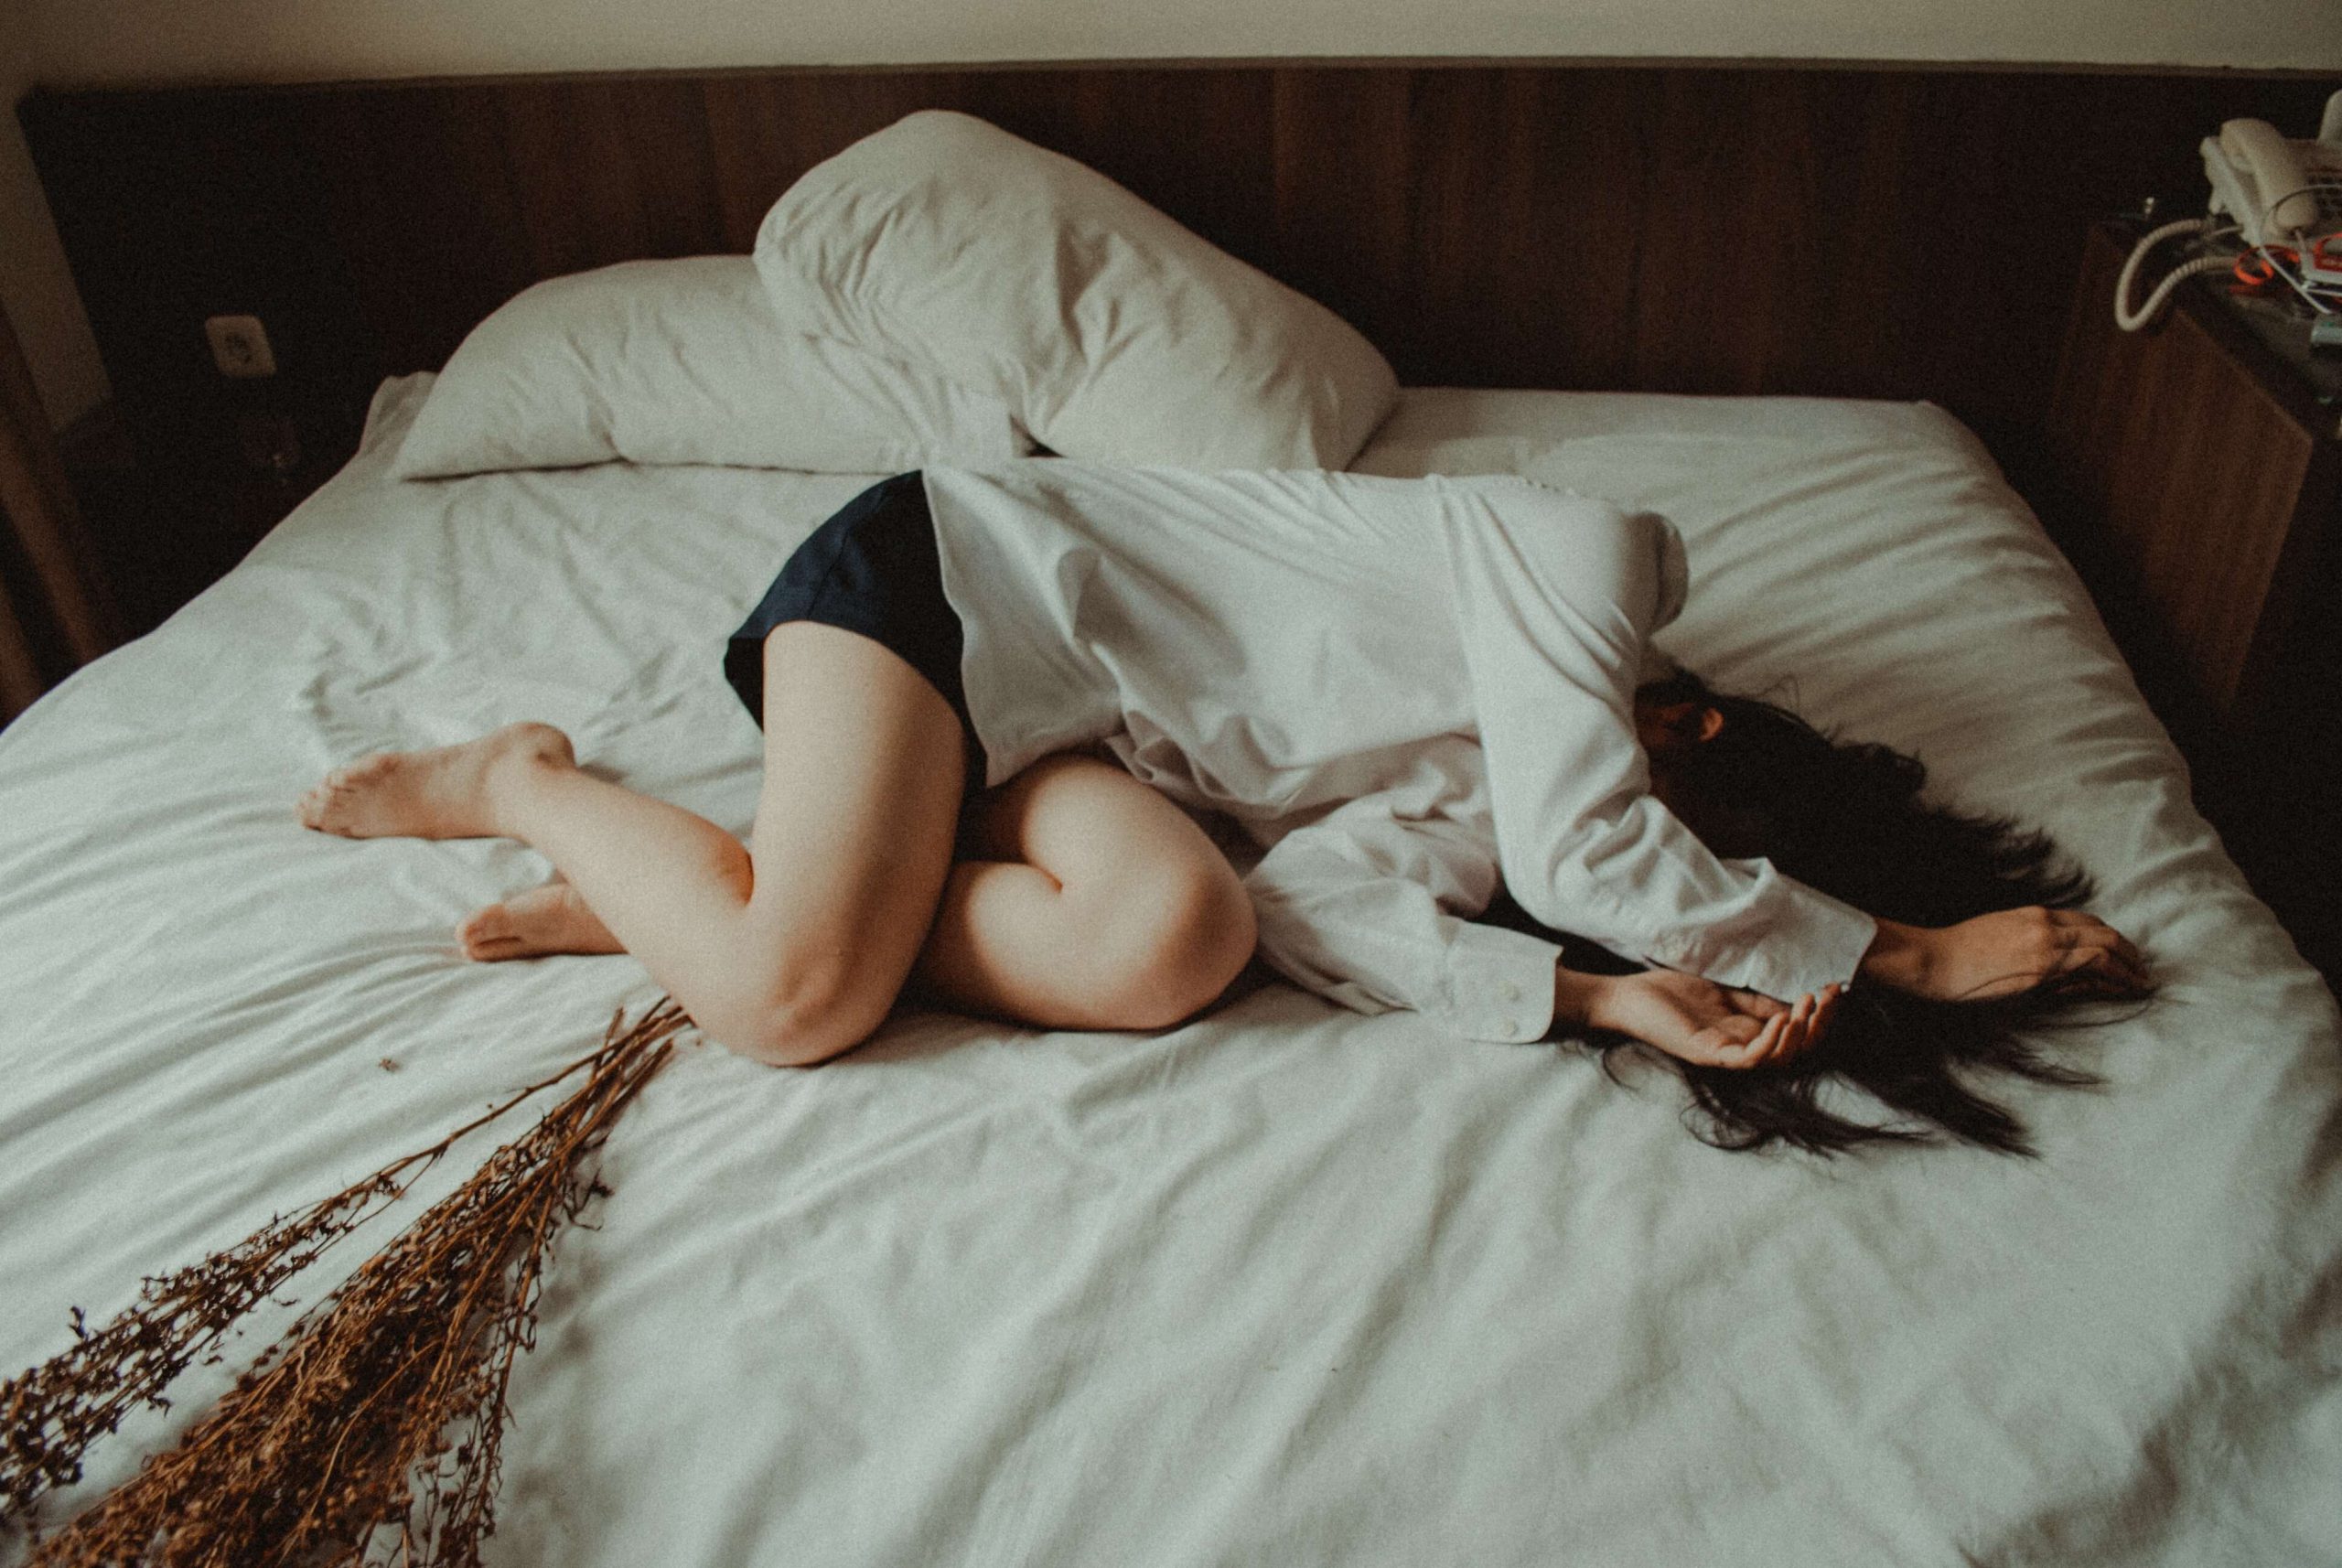 Girl feeling pain laying on a bed - Mindful ways to deal with a breakup | Life in a balance